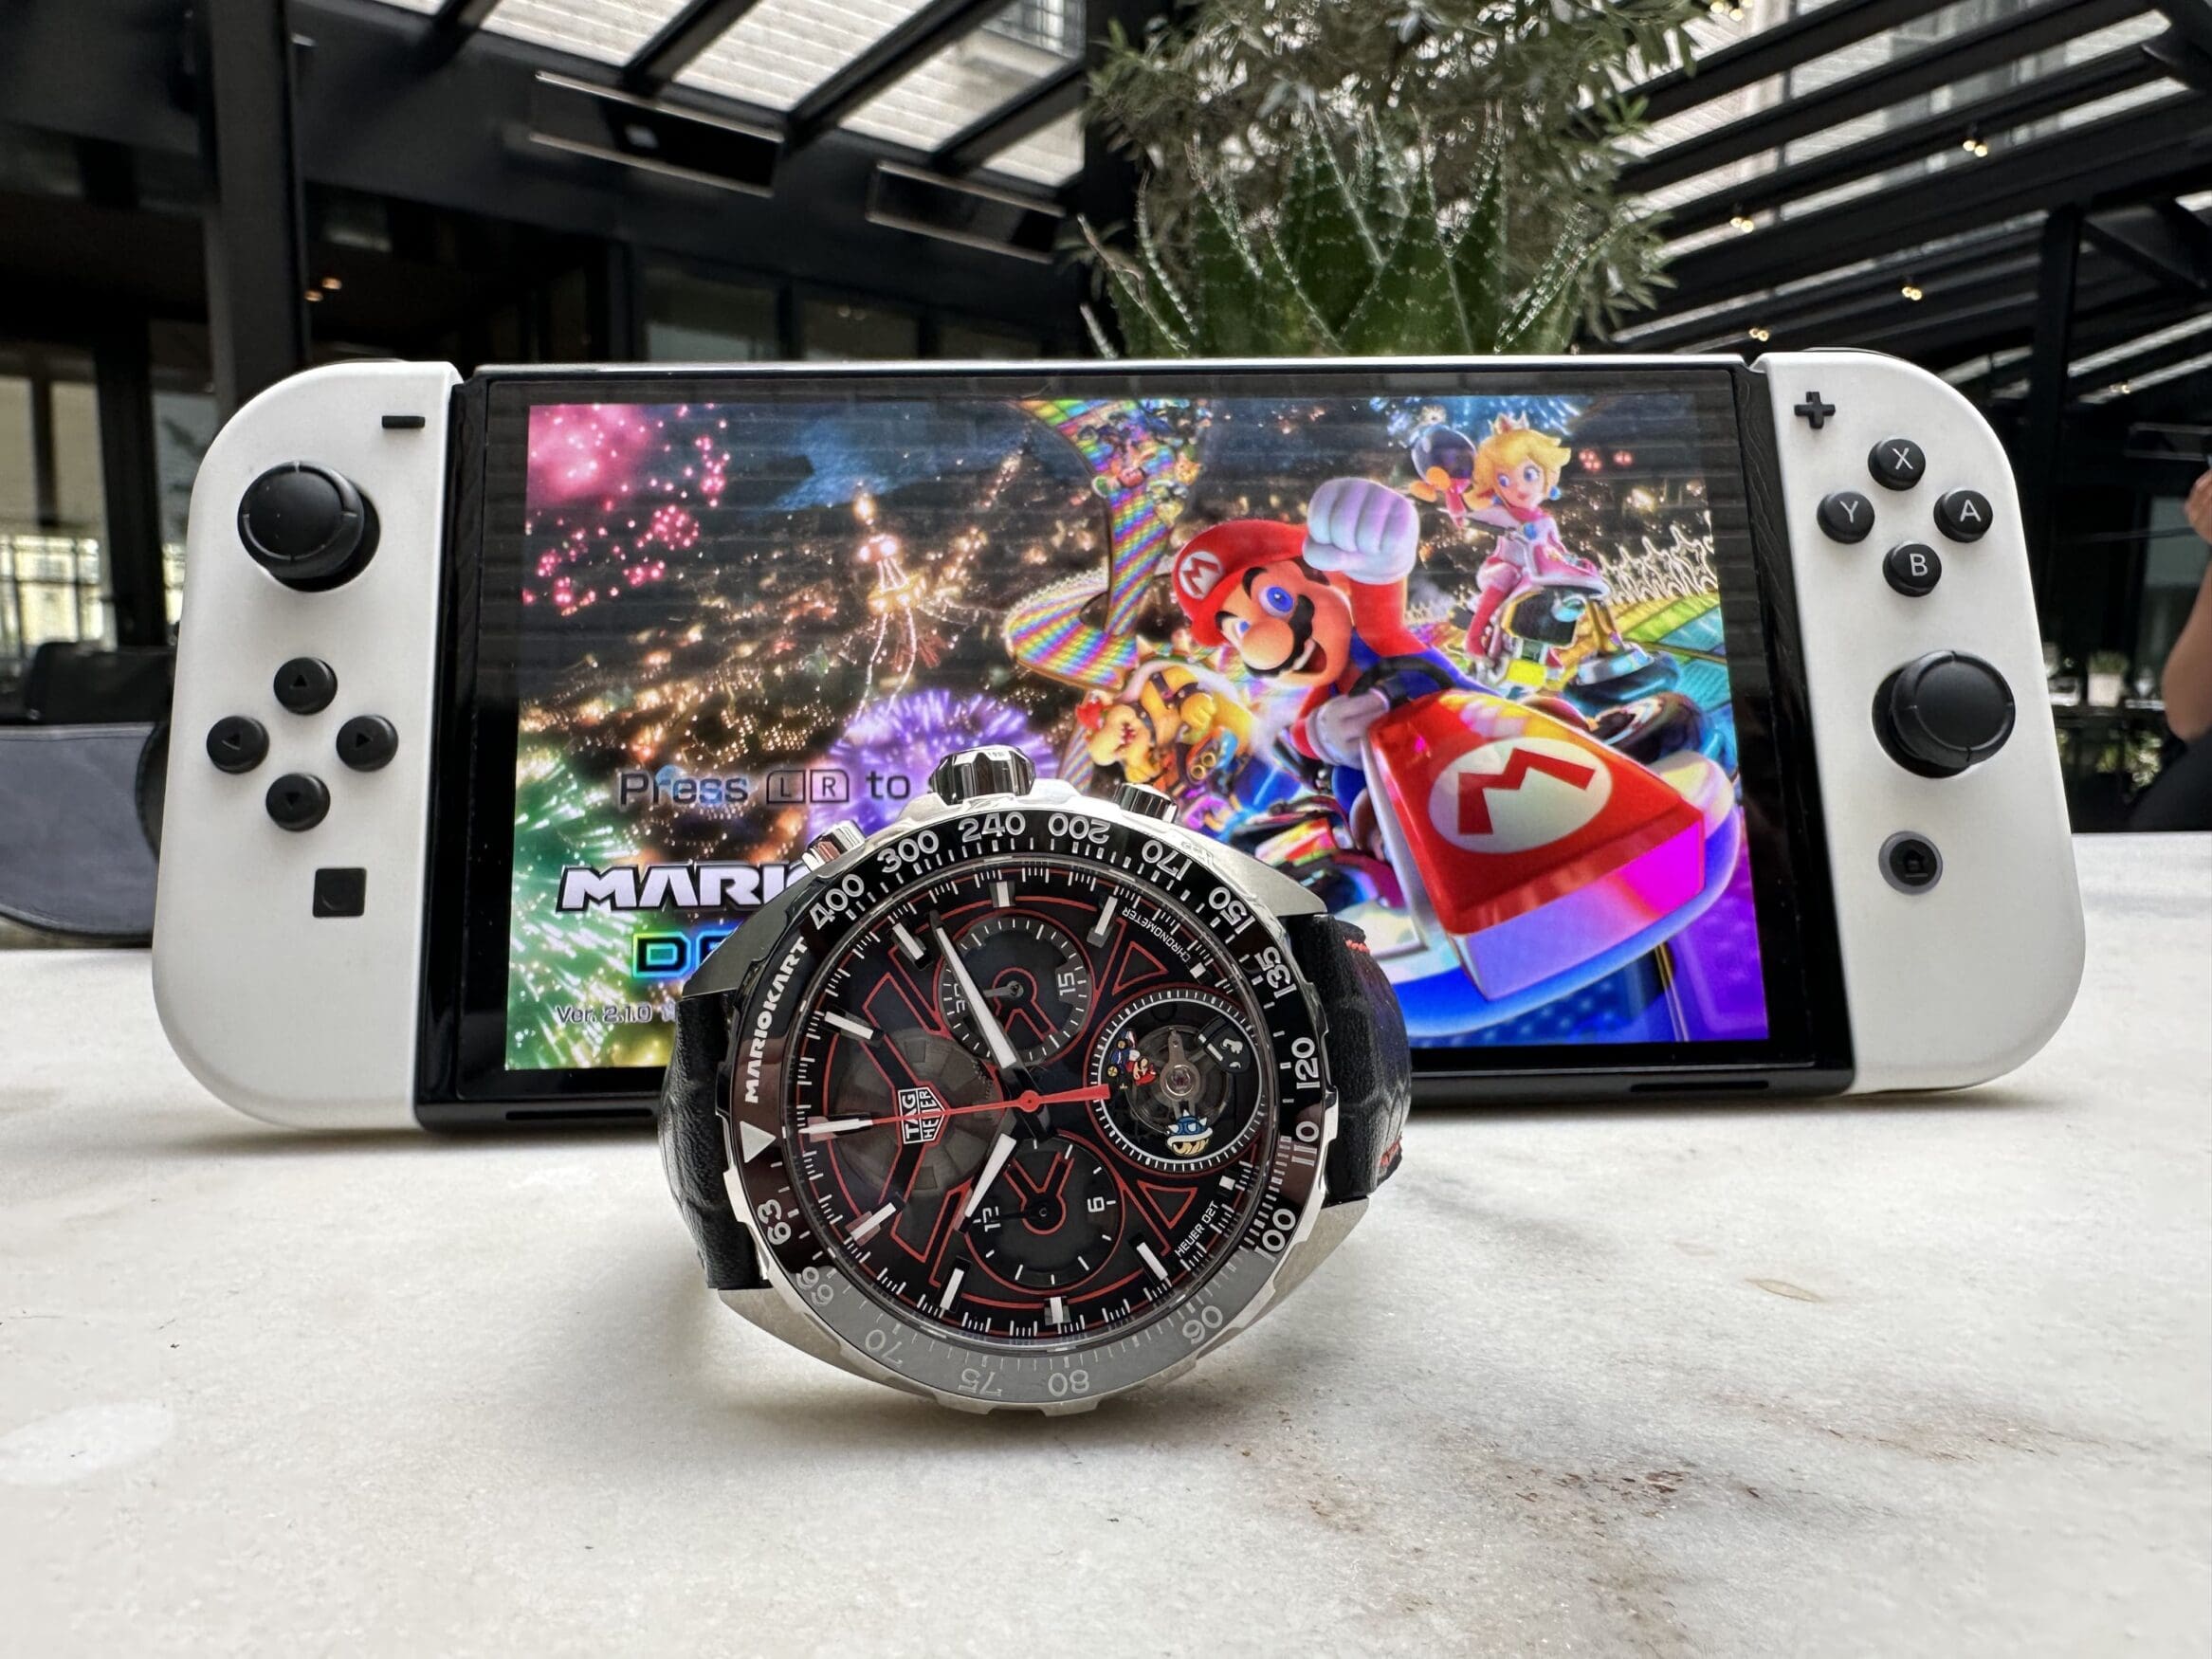 TAG Heuer debuts two Formula 1 x Mario Kart Limited Editions that fans will race to shell out for